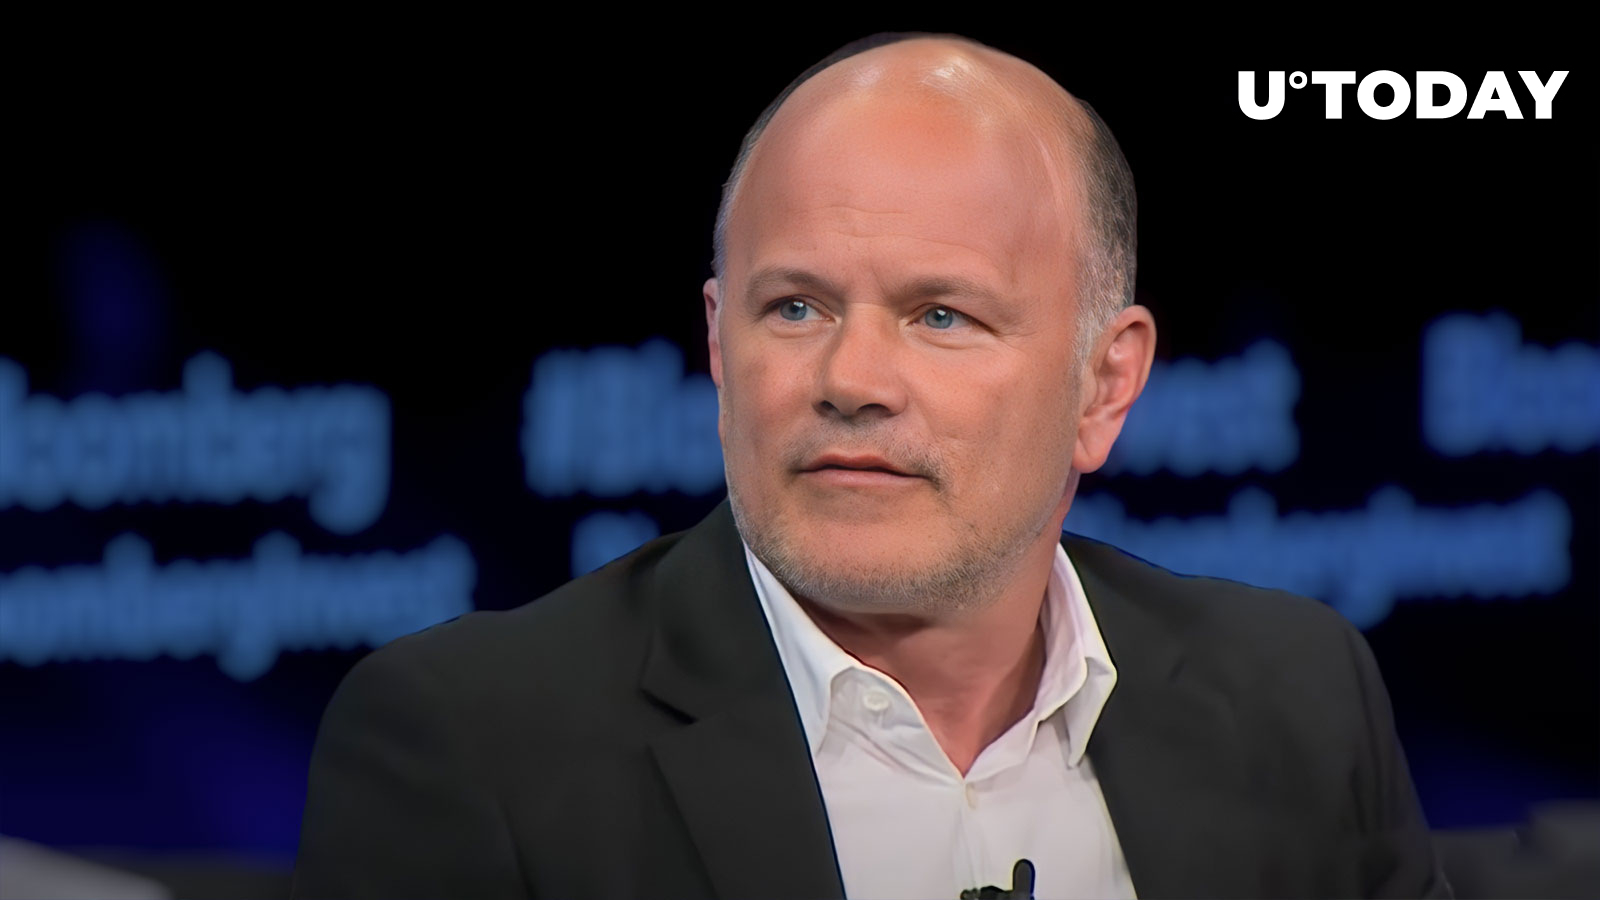 Bitcoin Bull Mike Novogratz Predicts Crypto Will Be Trading Higher This Year